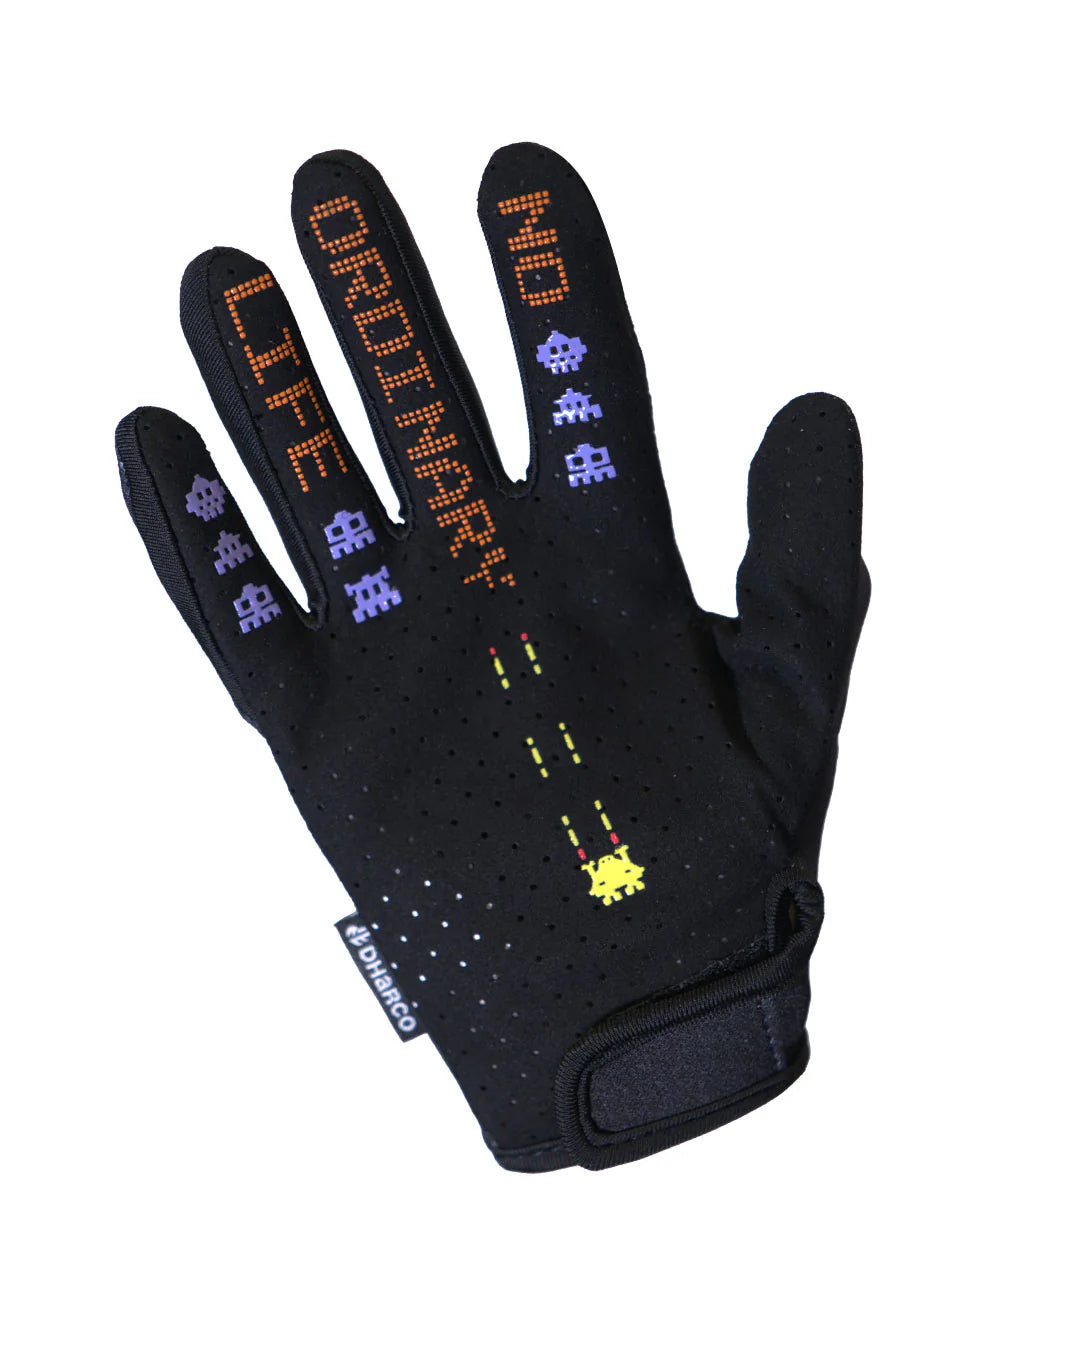 DHaRCO Youth Race Glove